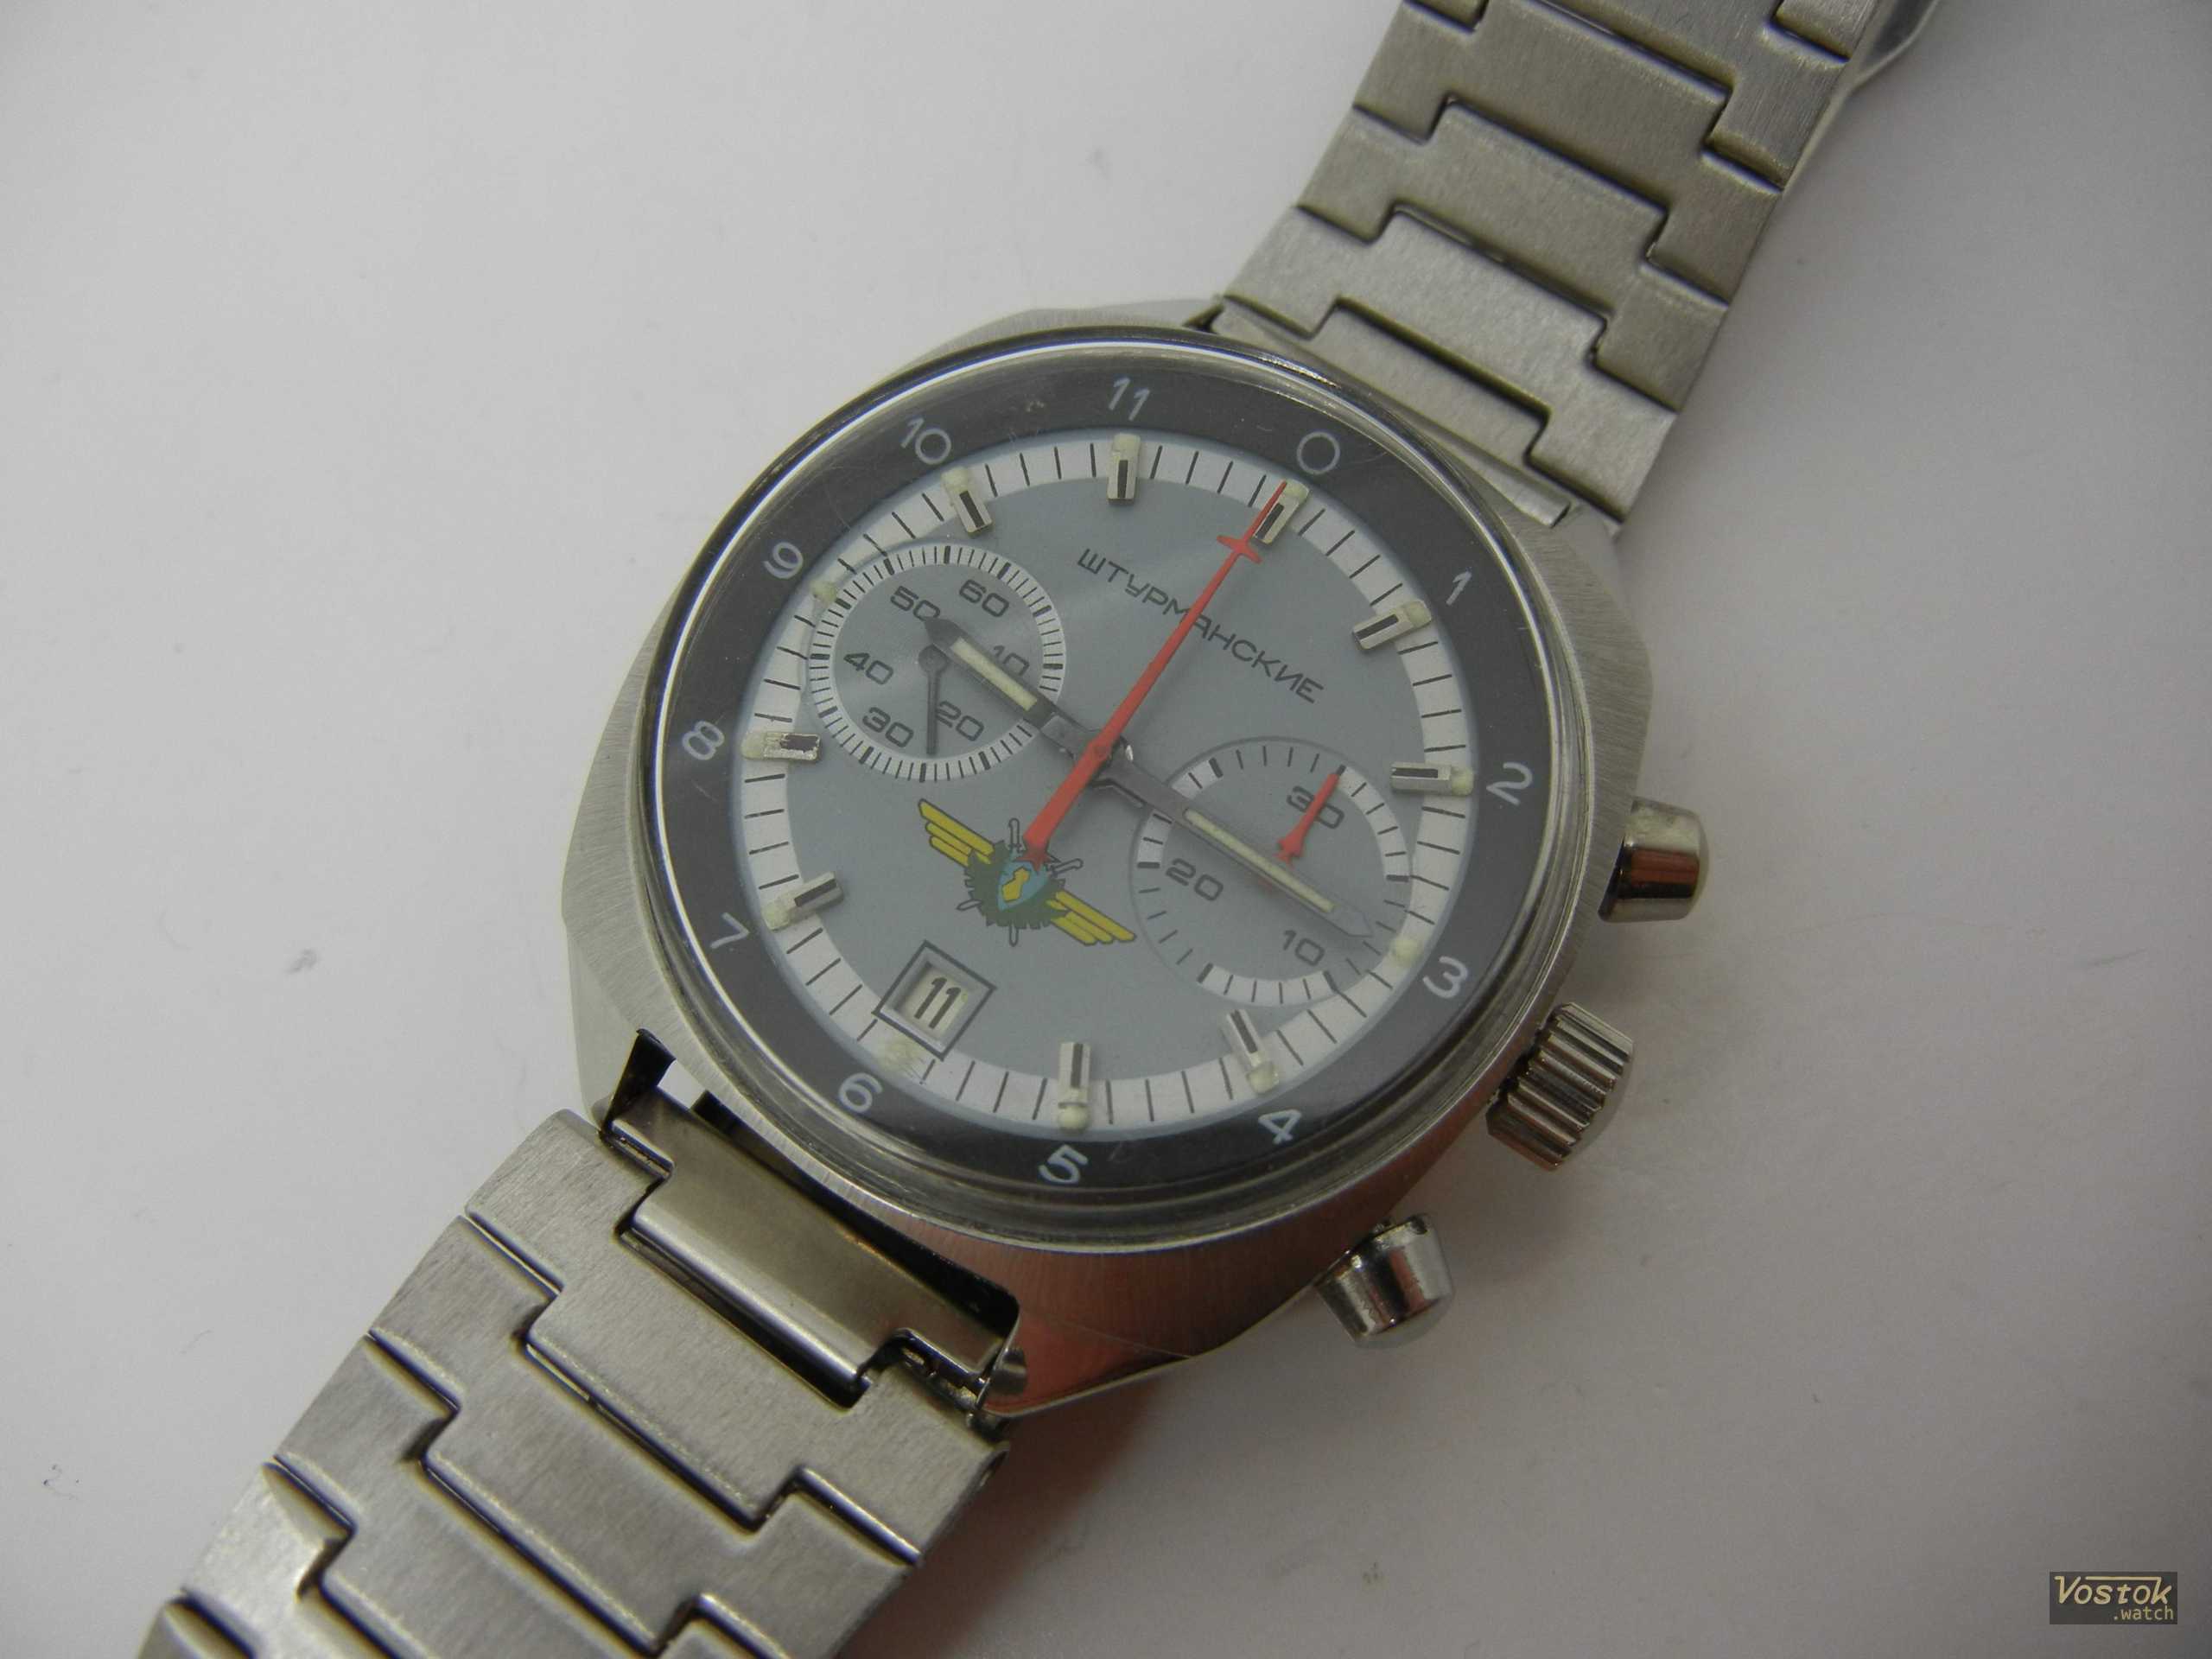 Official Online Store of the Vostok Watch Manufacturer Chistopol 